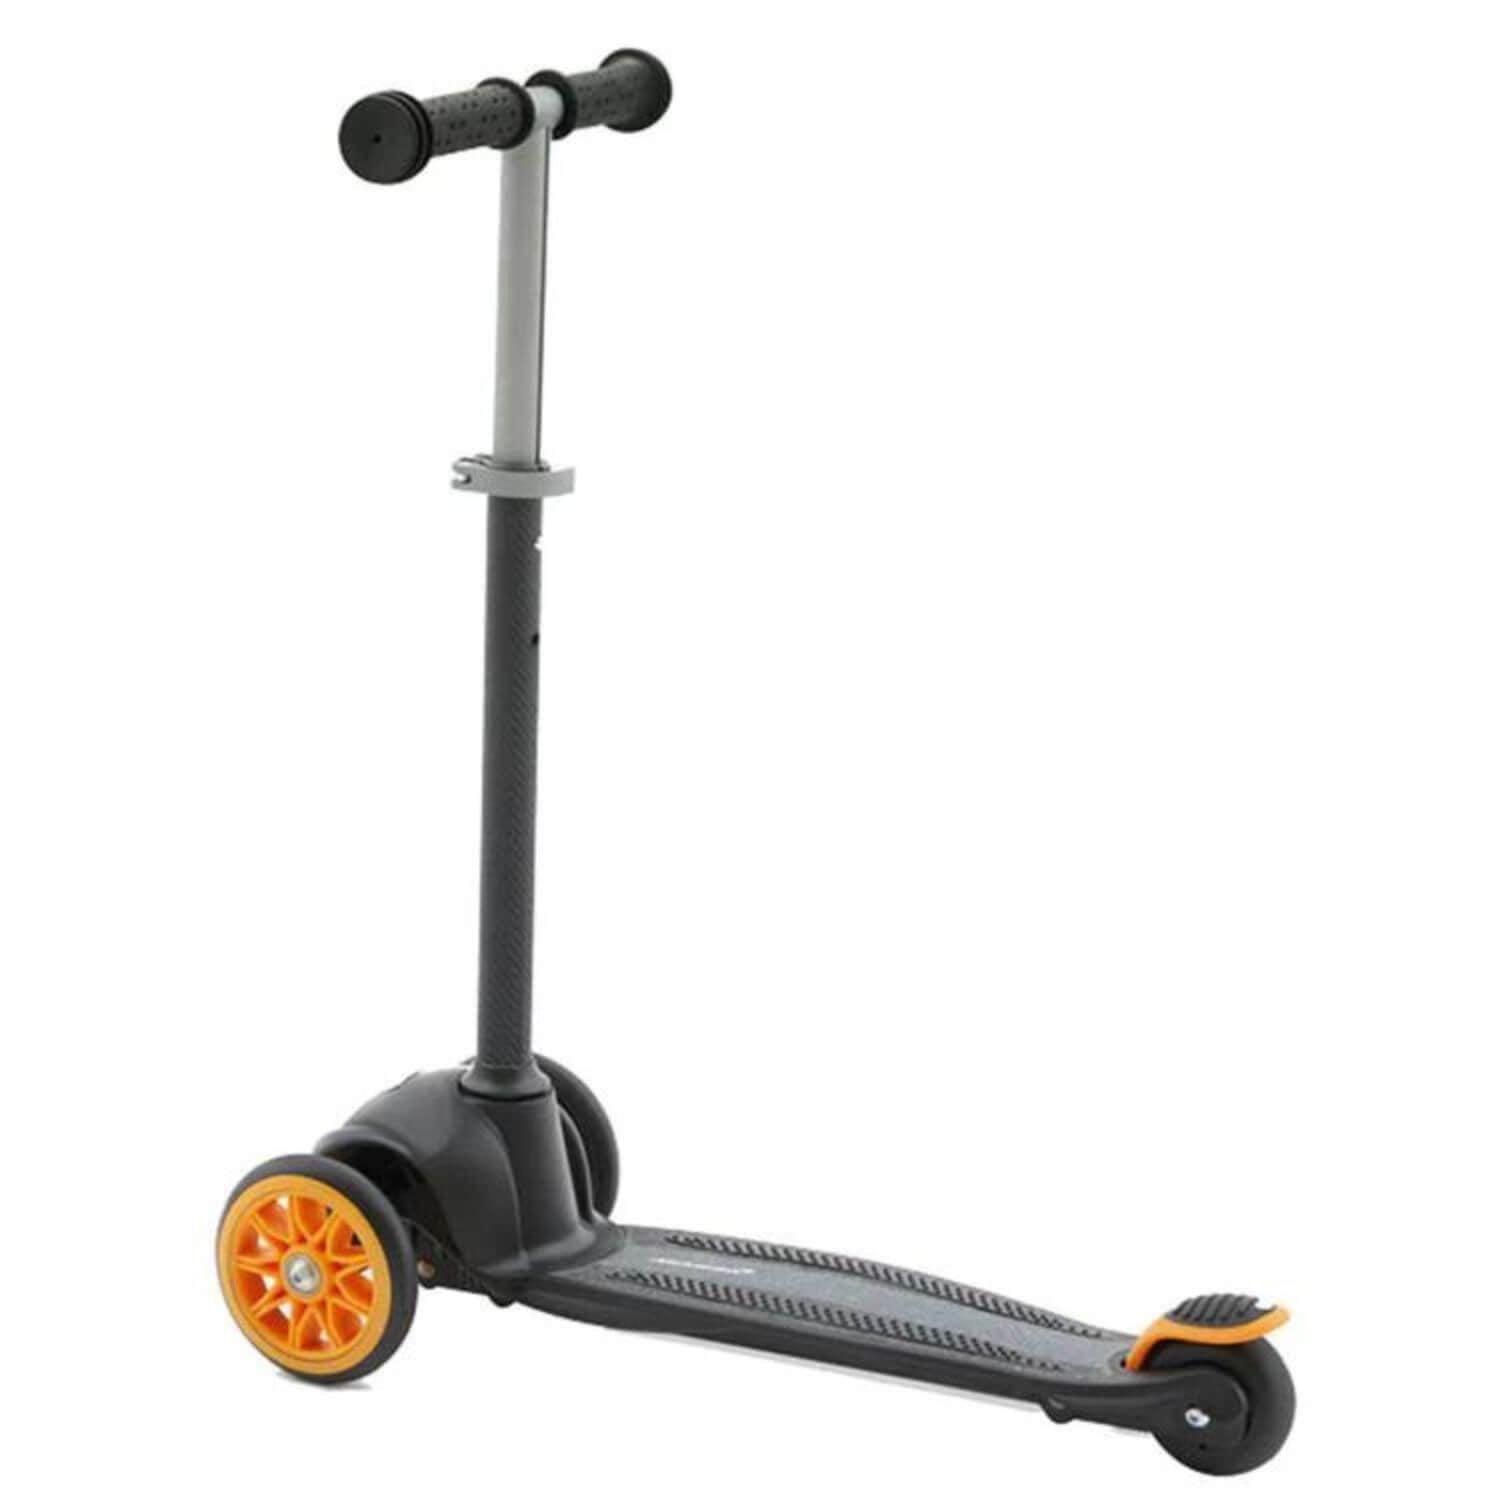 McLaren Scooters Toddler Size